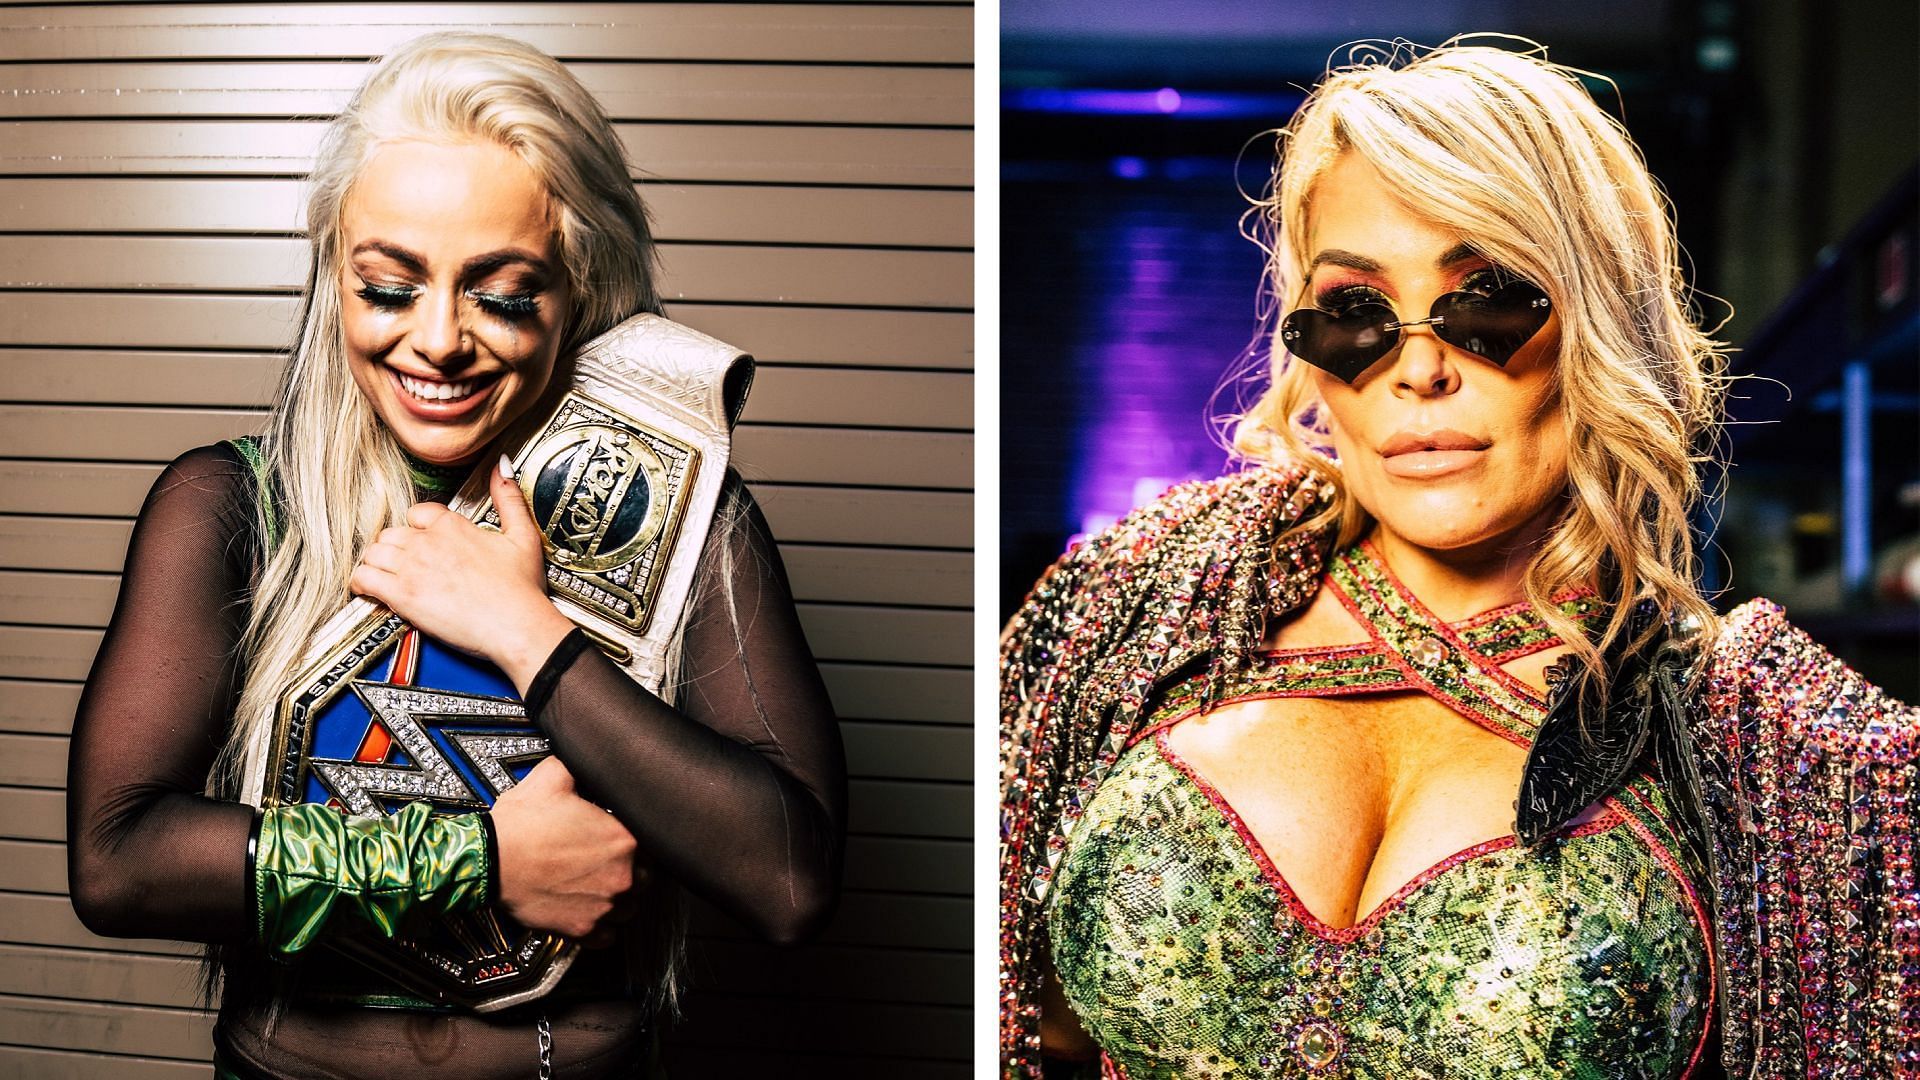 Liv Morgan and Natalya are set to clash on WWE SmackDown